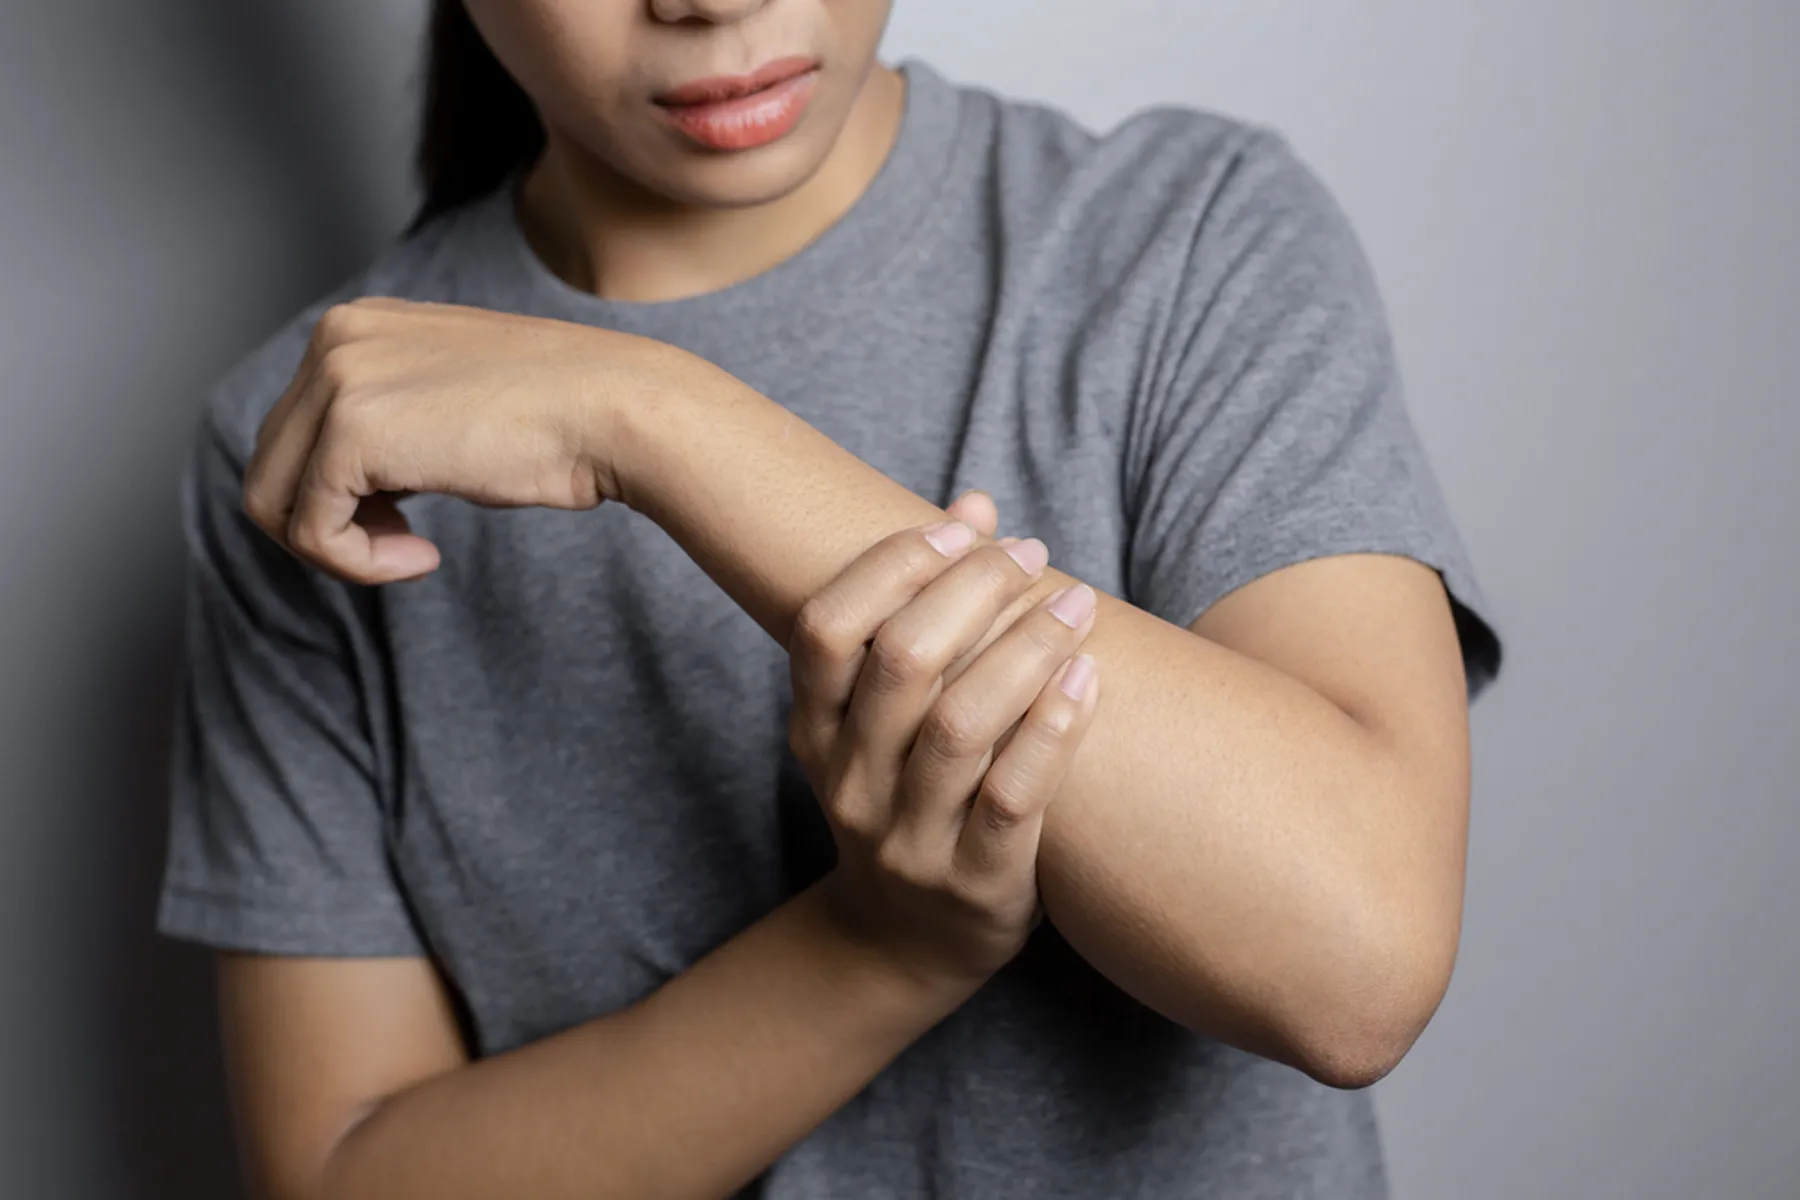 A woman holds her arm, indicating nerve pain (Neuropathy)